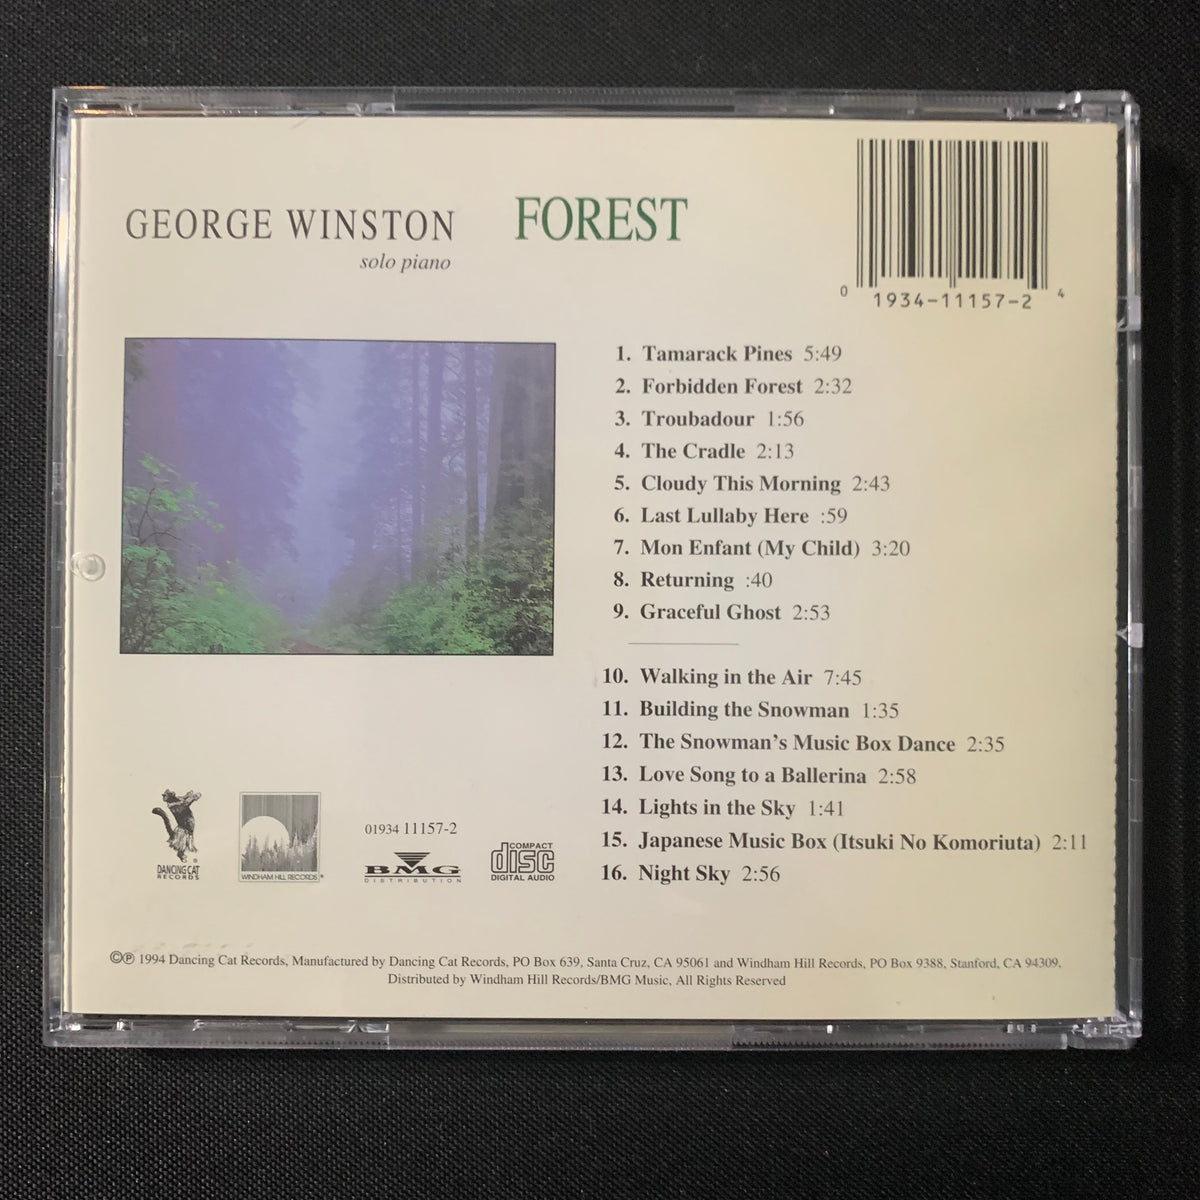 CD George Winston 'Forest' (1994) solo piano new age Windham Hill rela